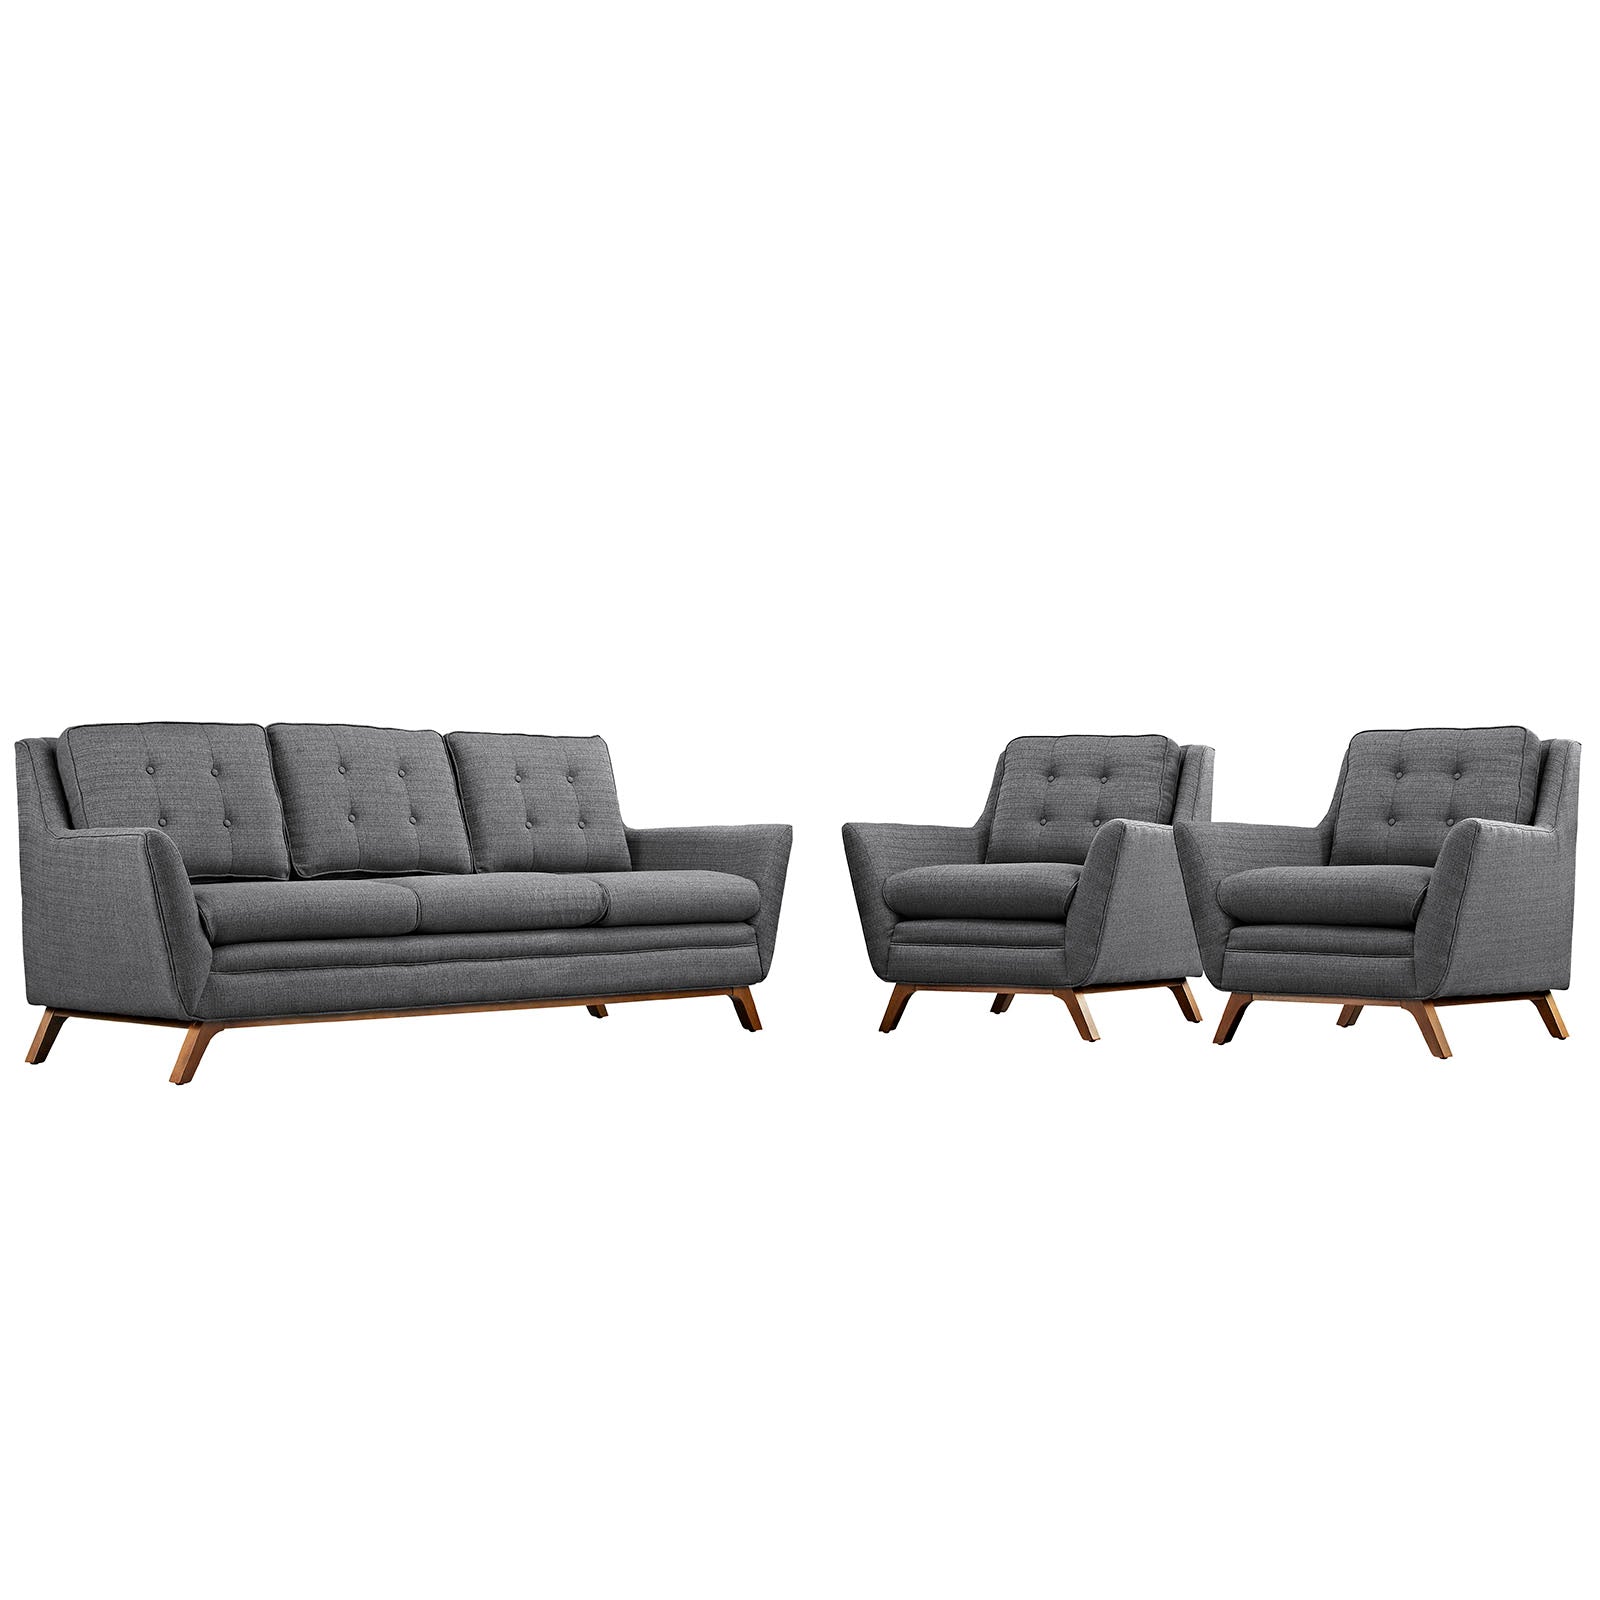 Modway Living Room Sets - Beguile 3 Piece Upholstered Fabric Living Room Set Gray